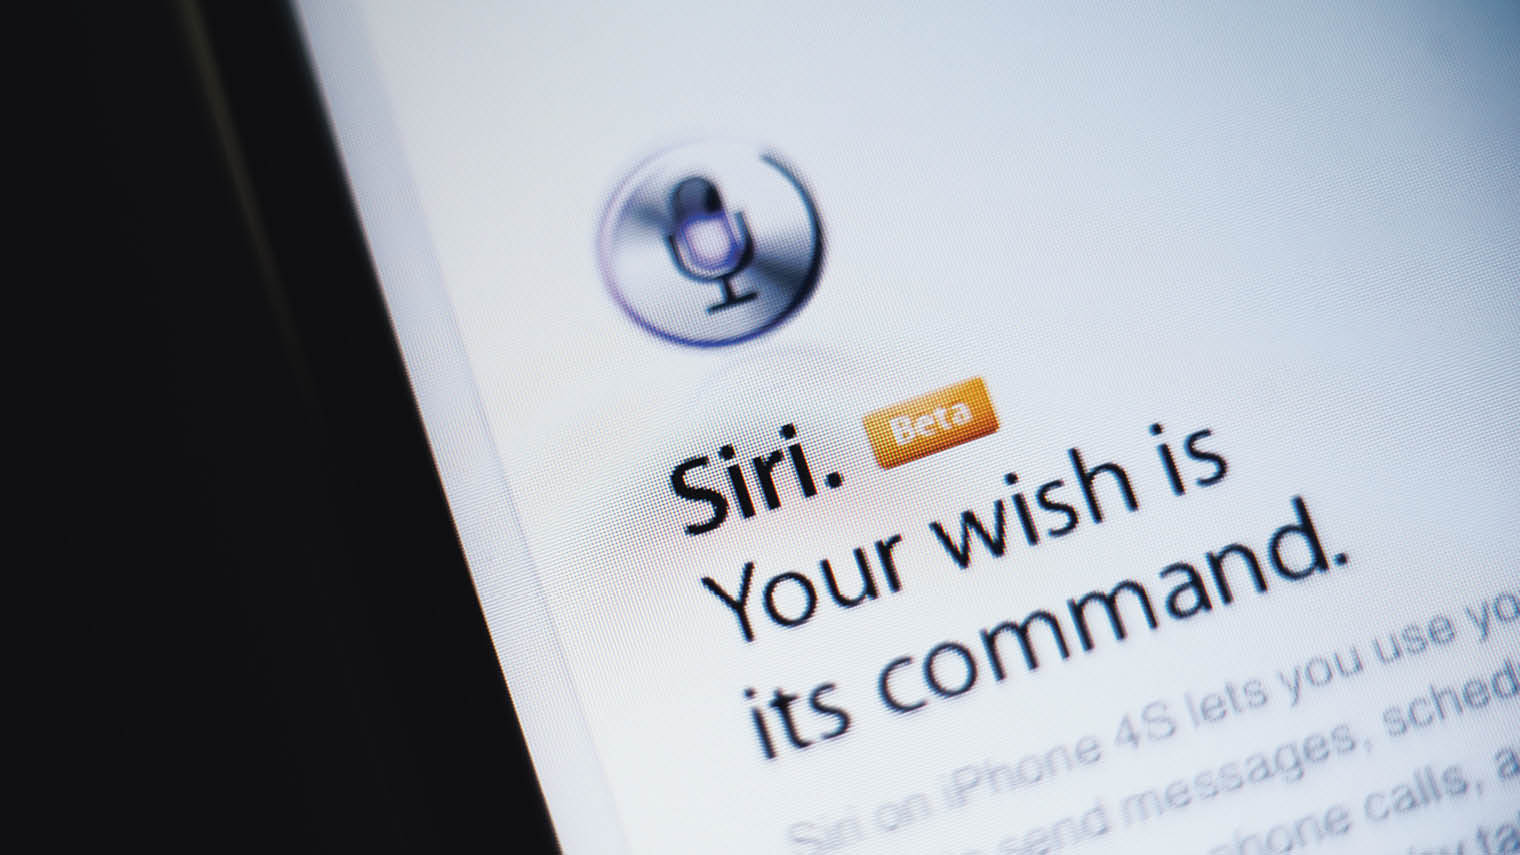 The default voice of Apple’s Siri virtual assistant is female, but users are able to change their settings to male